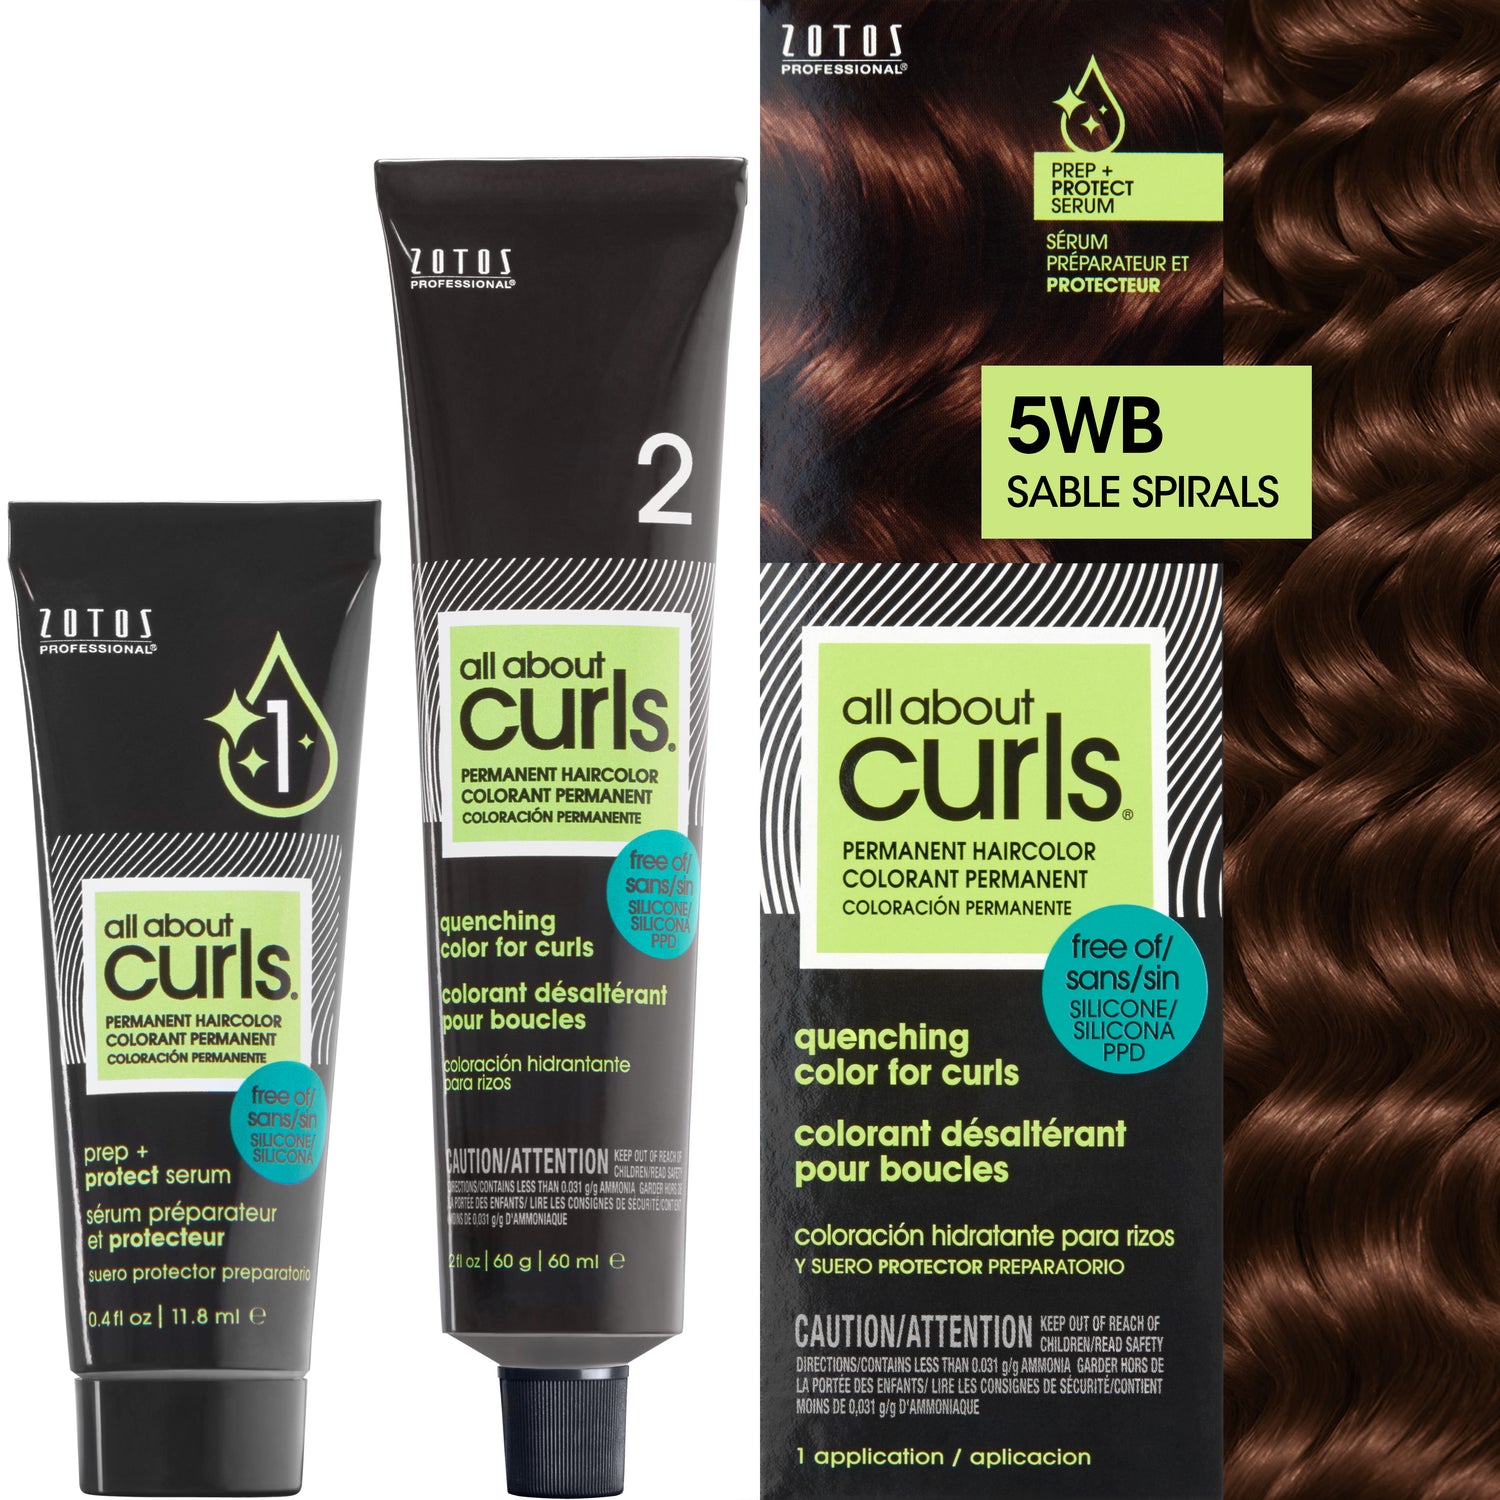 Two bottles and packaging for All About Curls Permanent Color in shade 5WB Sable Spirals.